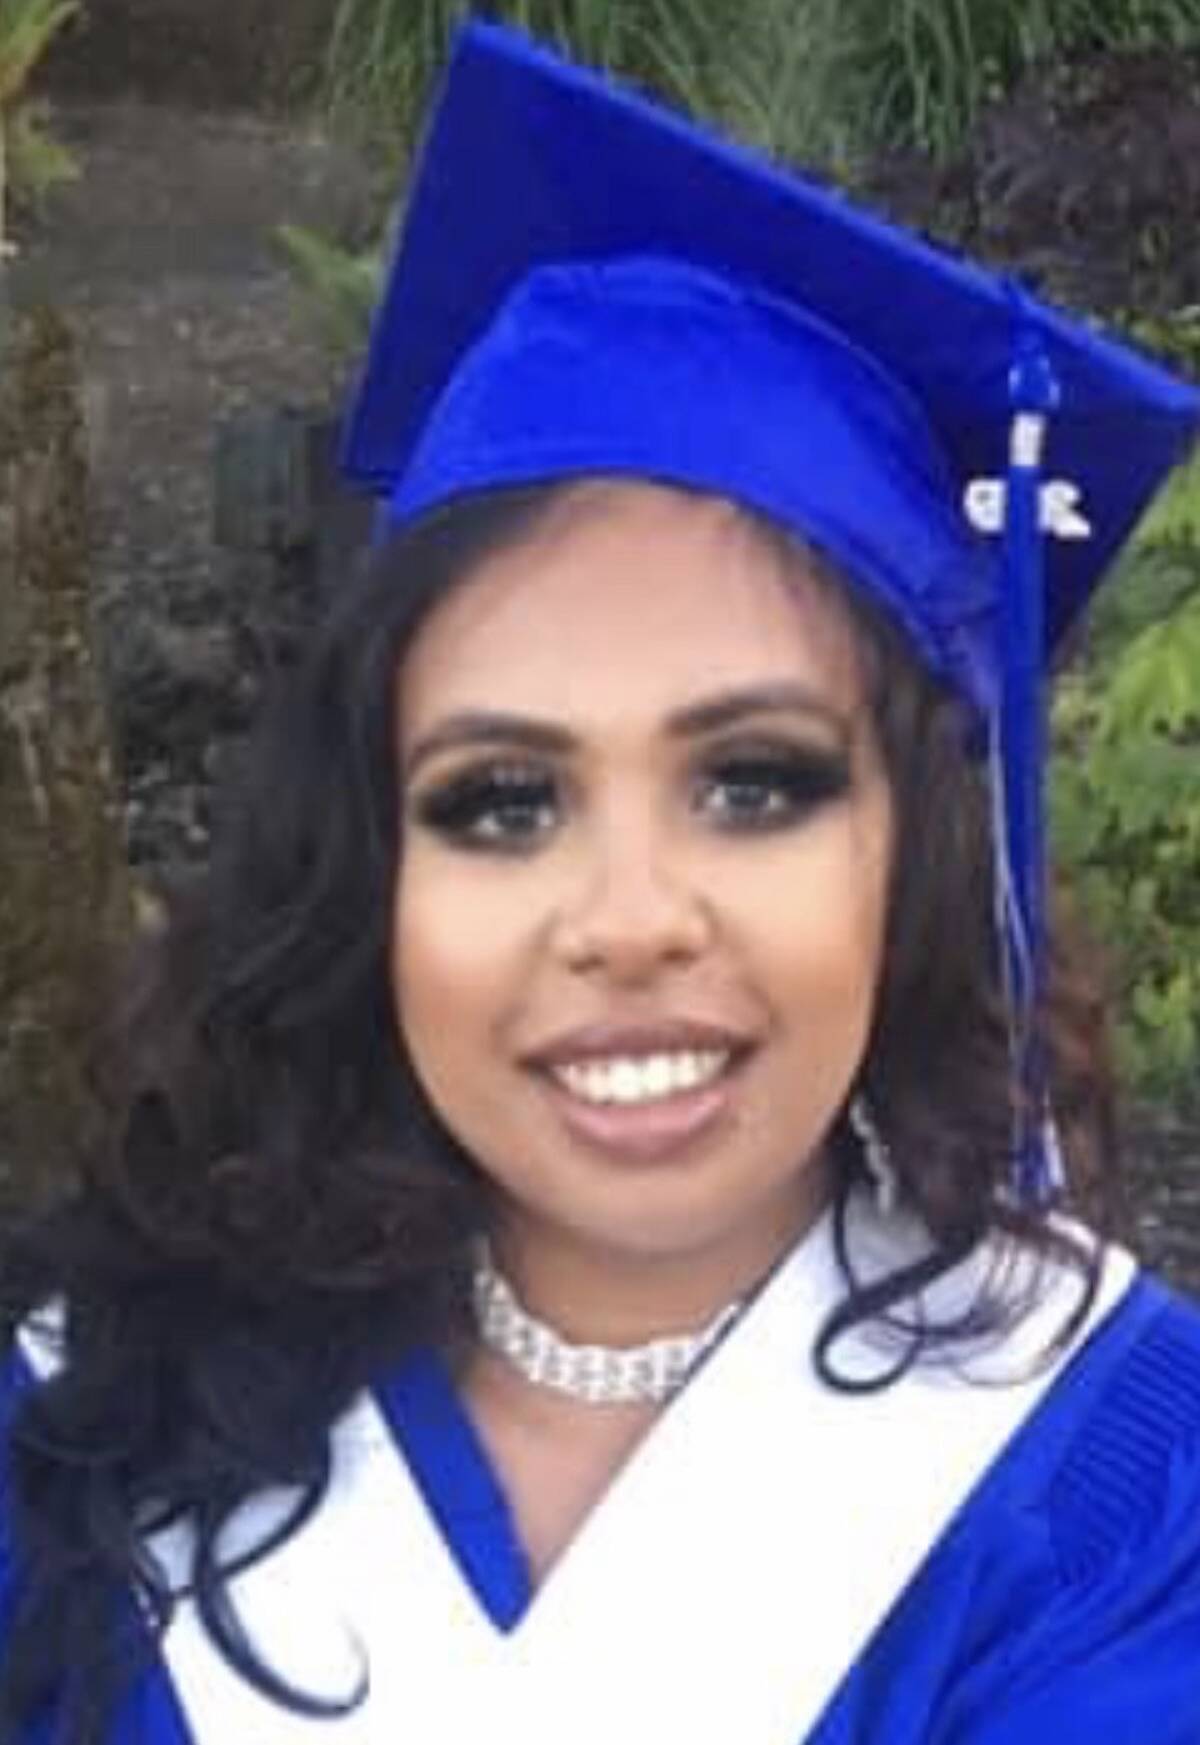 Photo of Aisha Harouya posted on the Integrated Homicide Investigation Team’s website.